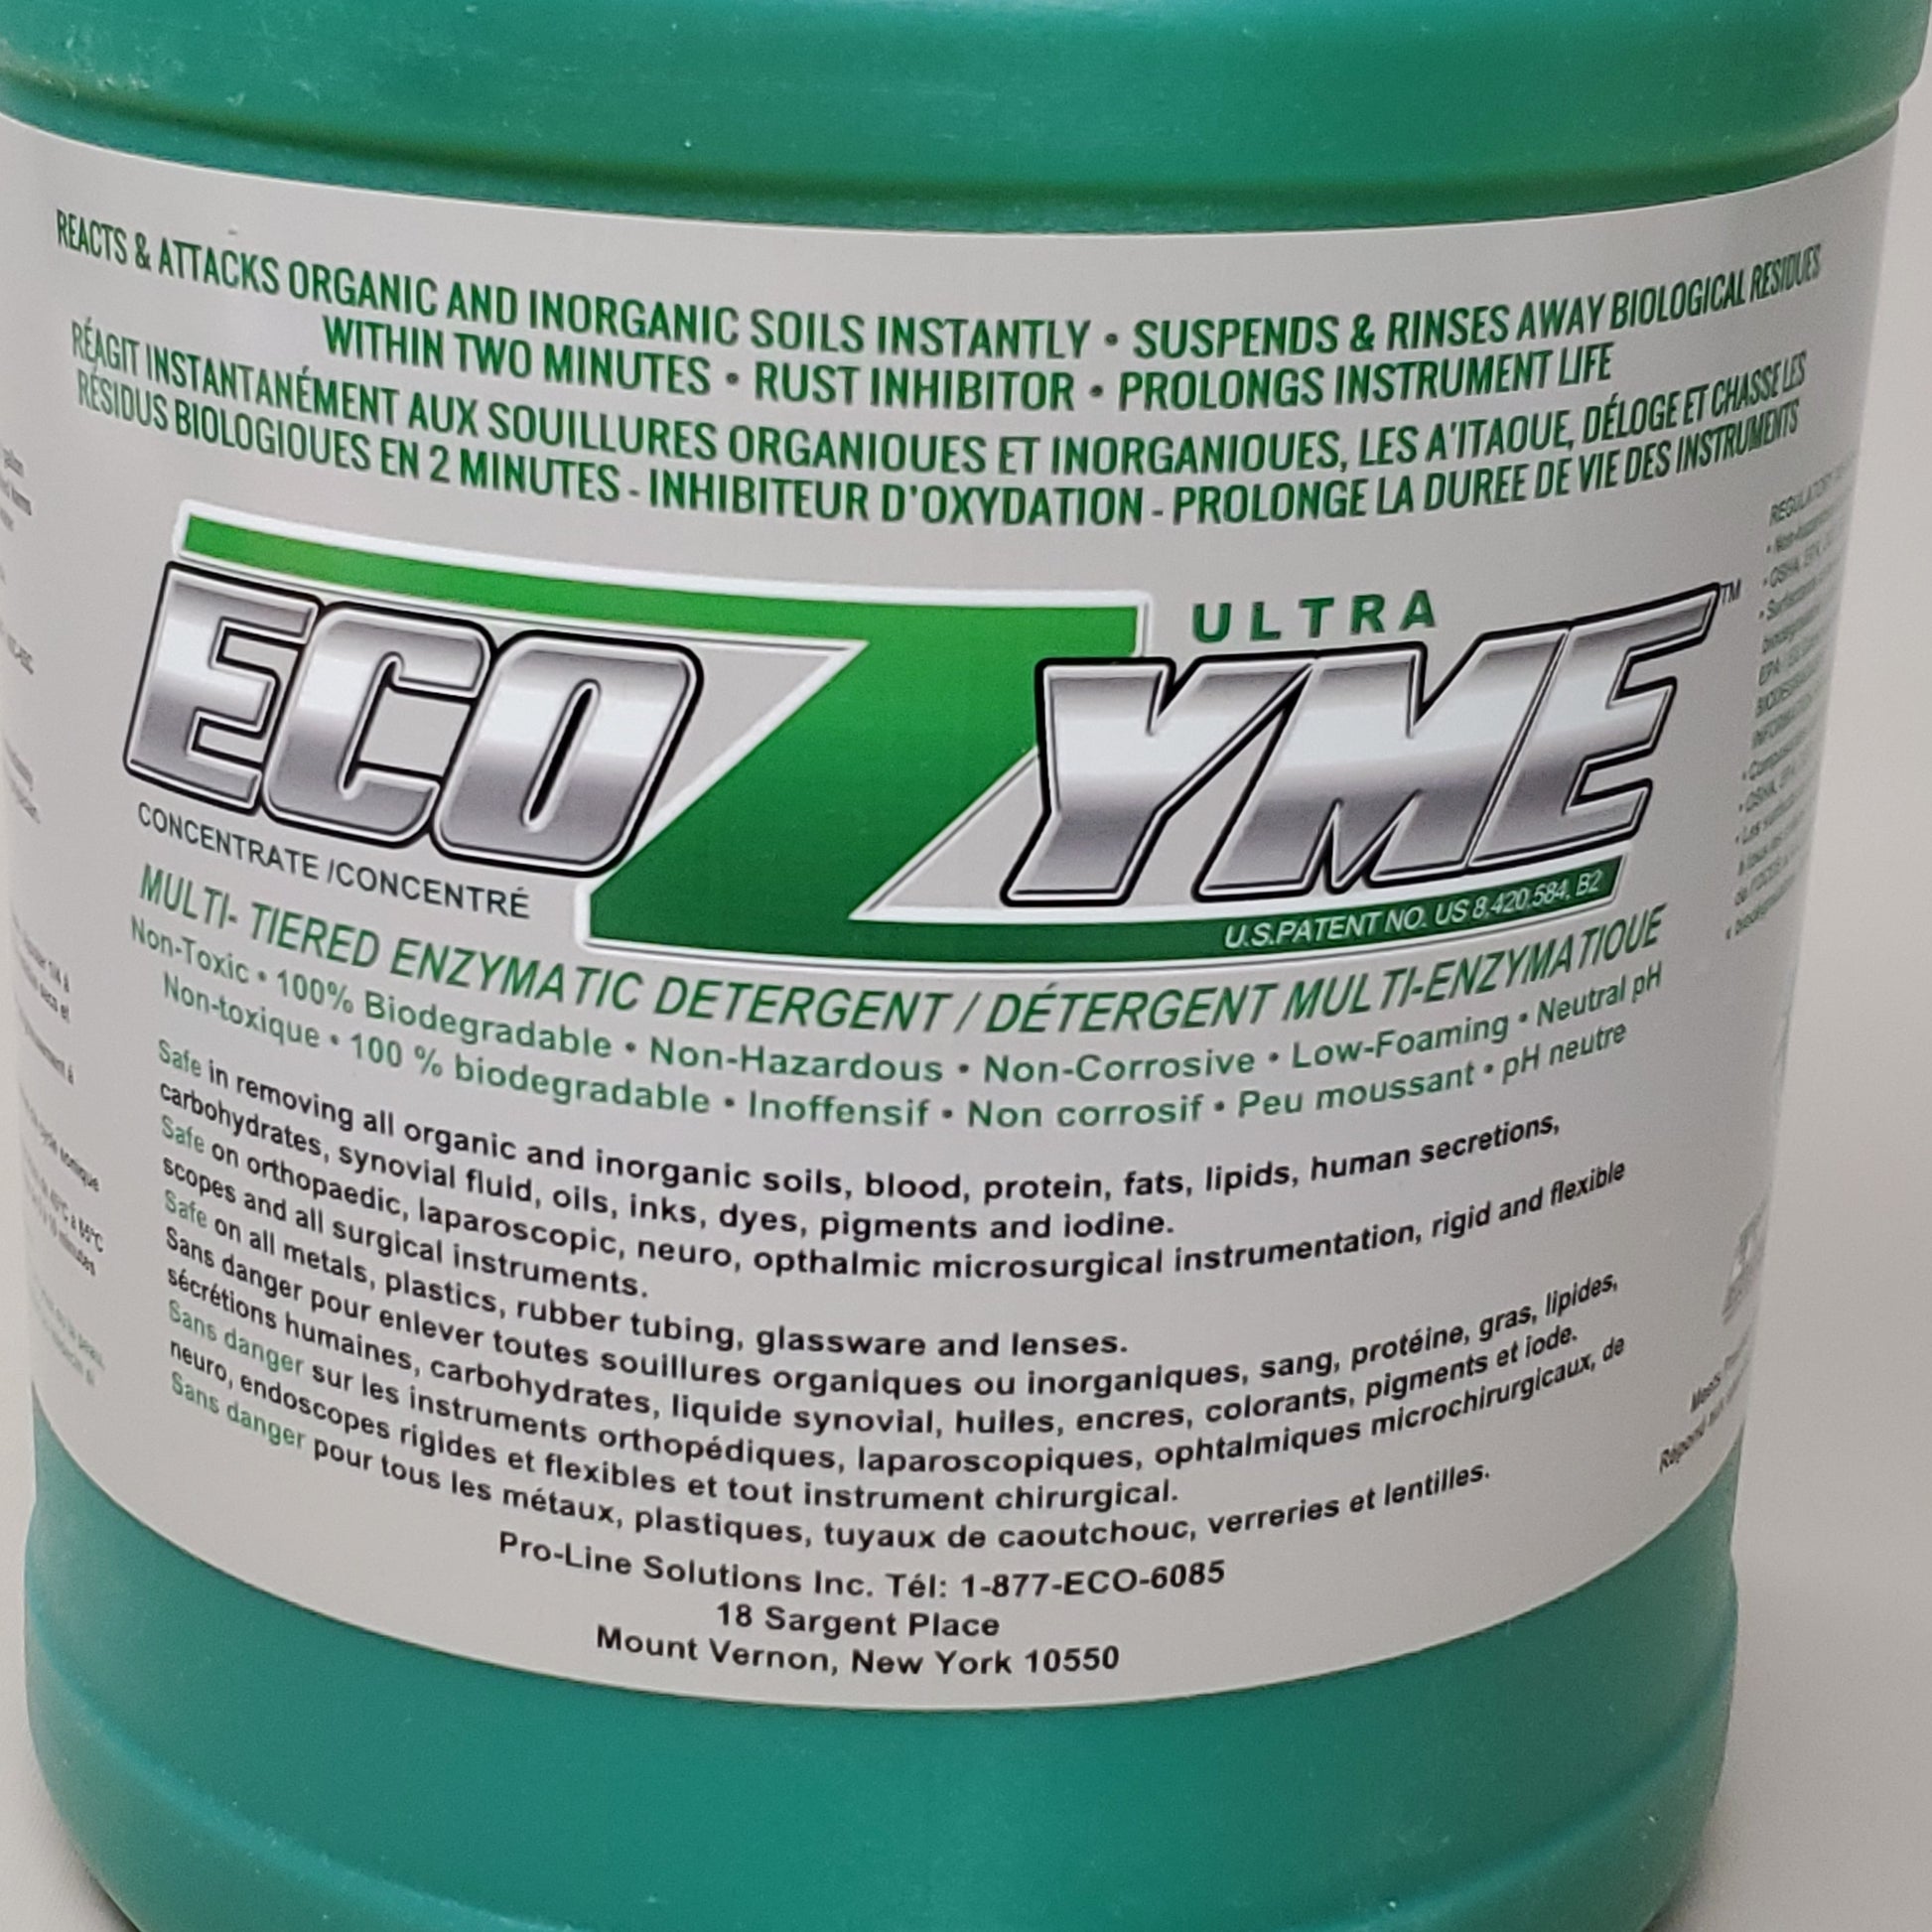 ECOZYME Enzymatic Detergent Ultra Concentrate 1 Gal. 8/23 18560-04 (New)